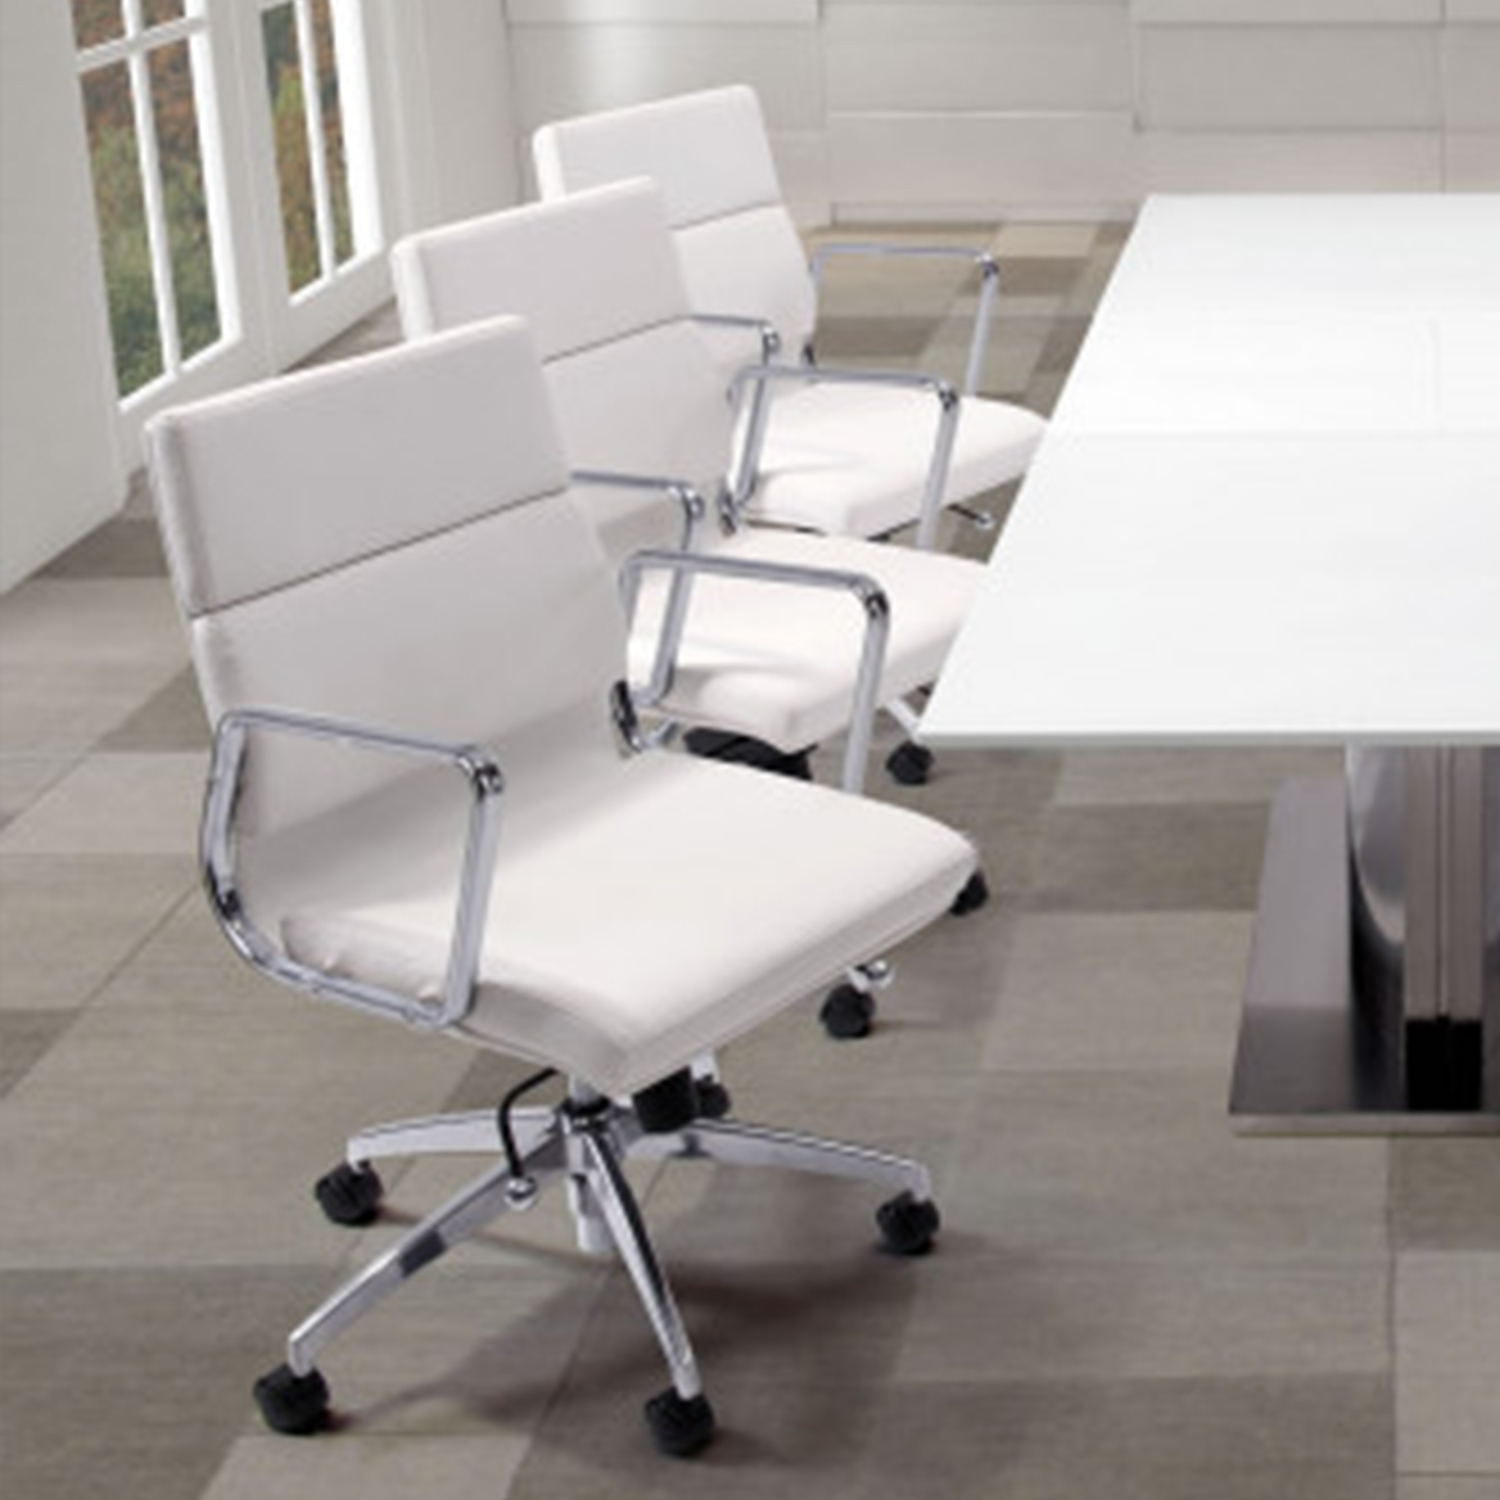 21" X 26" X 44.5" White Leatherette High Back Office Chair